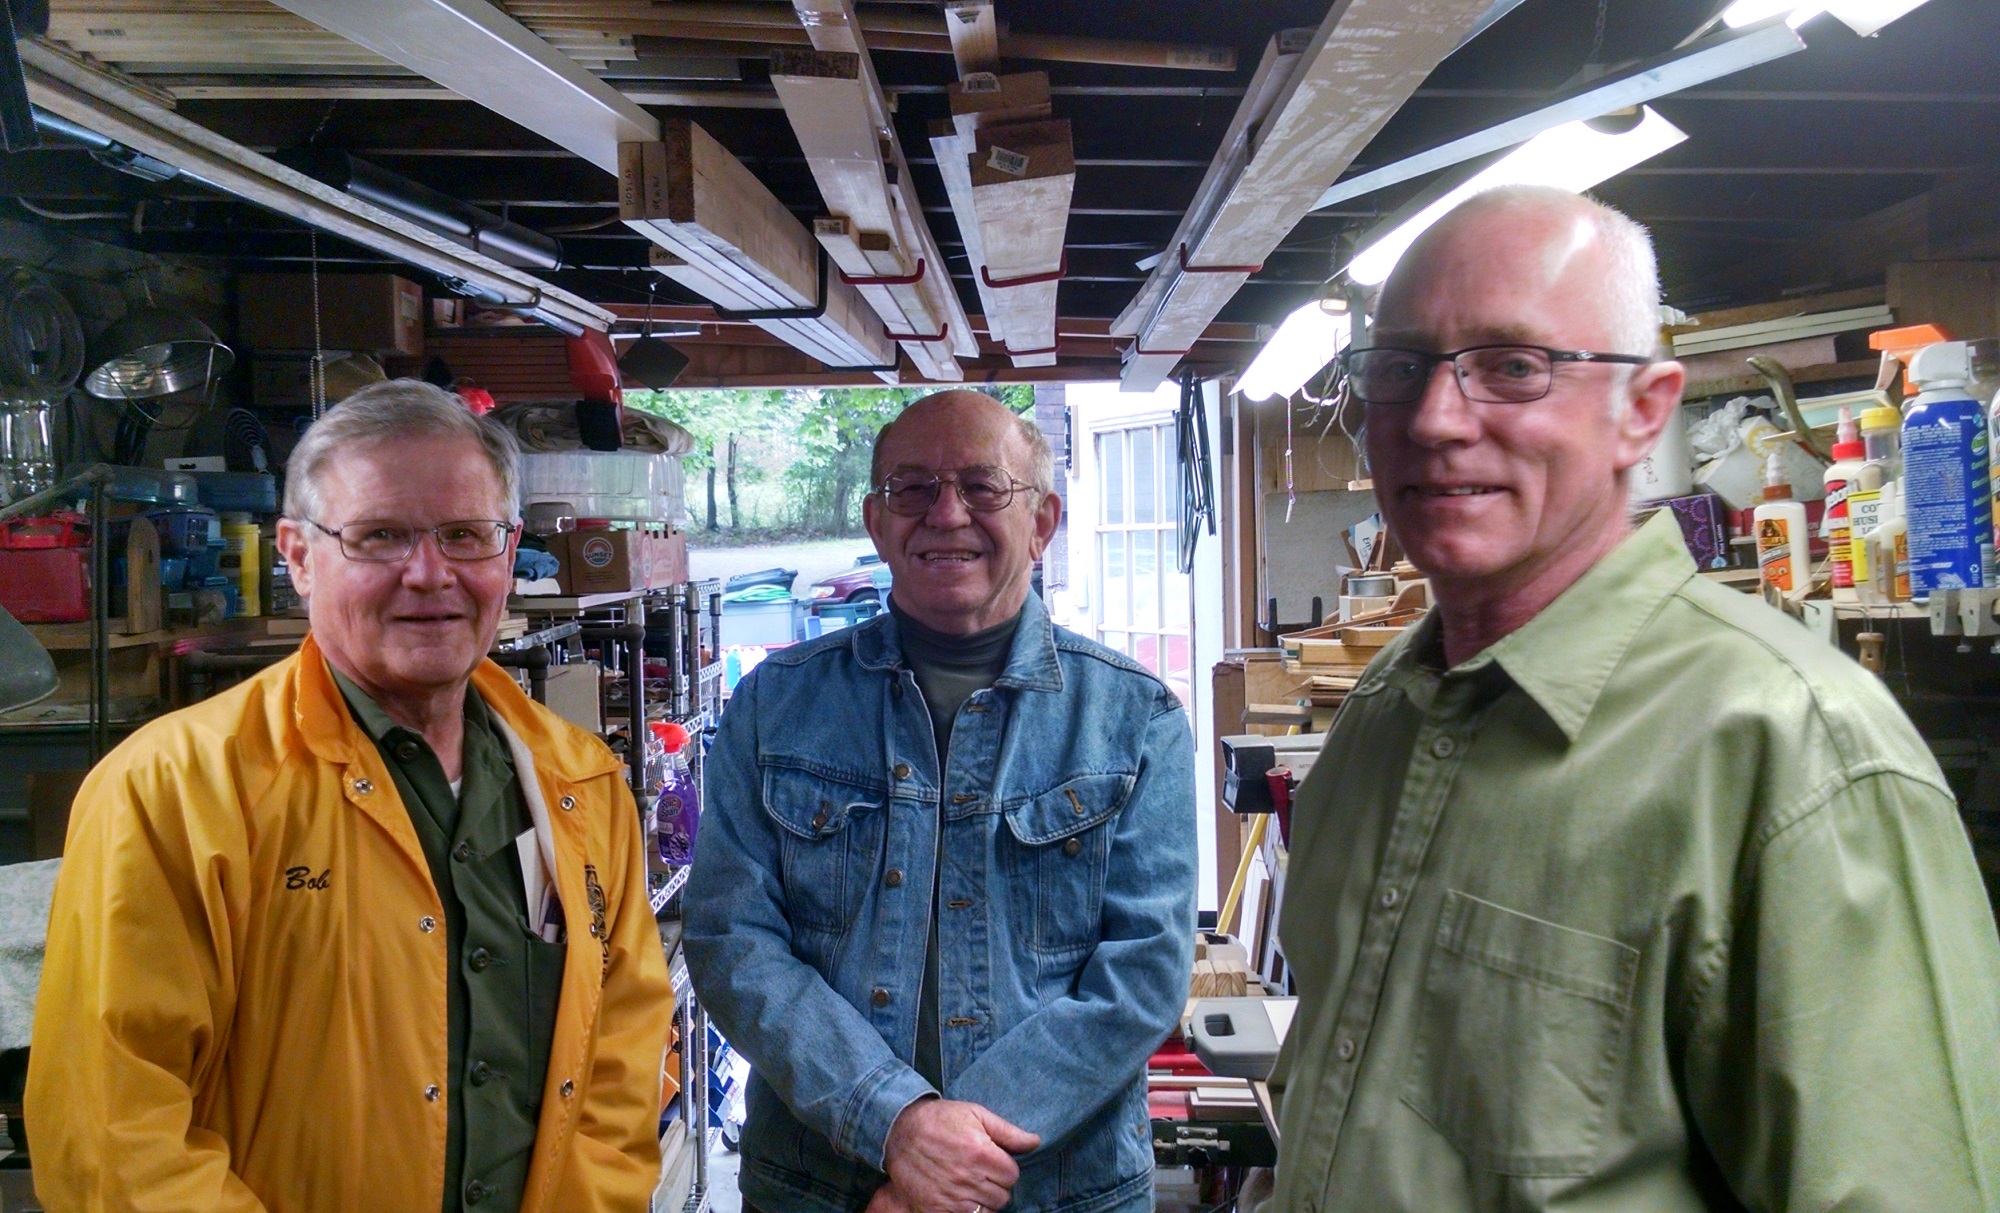 Three Distinguished Visitors to the Shop